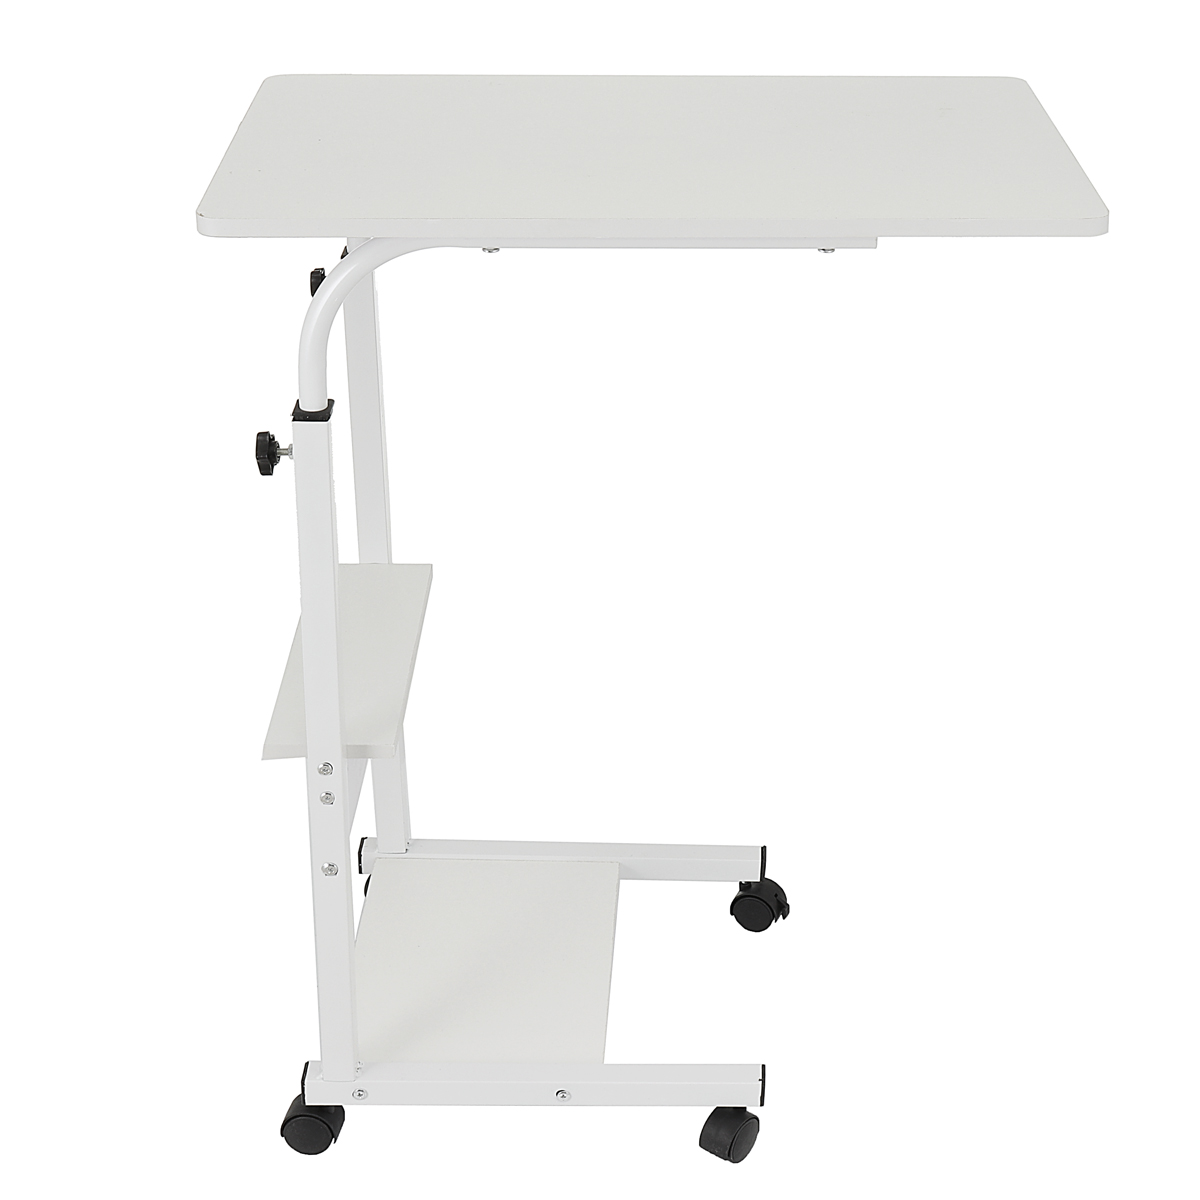 Movable-Laptop-Desk-Adjustable-Height-Computer-Notebook-Desk-Writing-Study-Table-Bedside-Tray-with-2-1750182-14